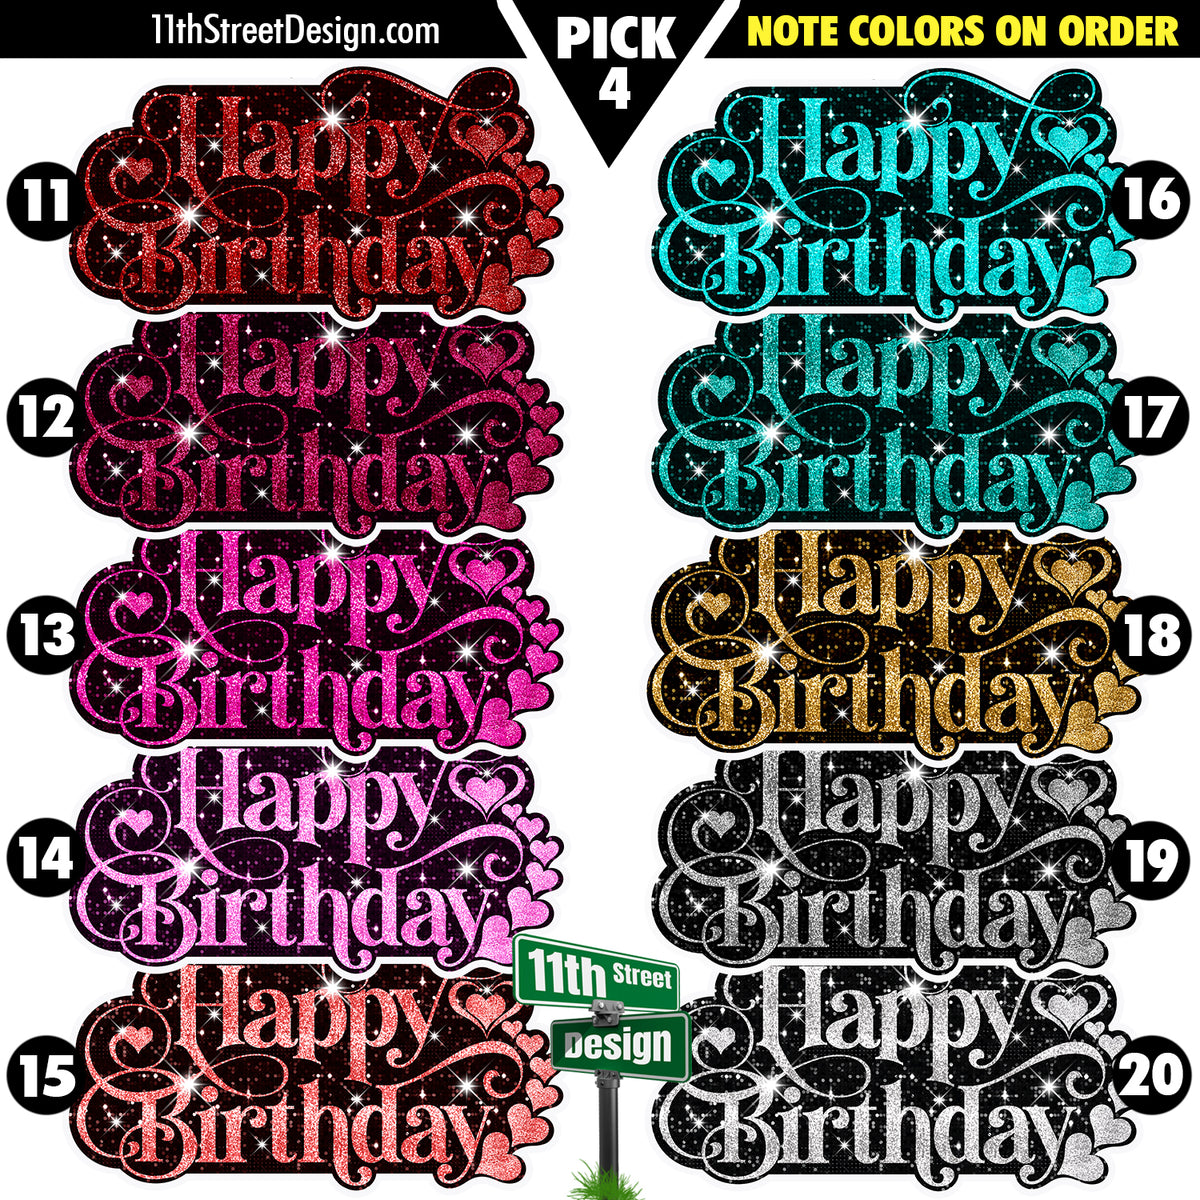 Hearts &amp; Swirls Happy Birthday Large Greeting Signs- Choose Your Colors!